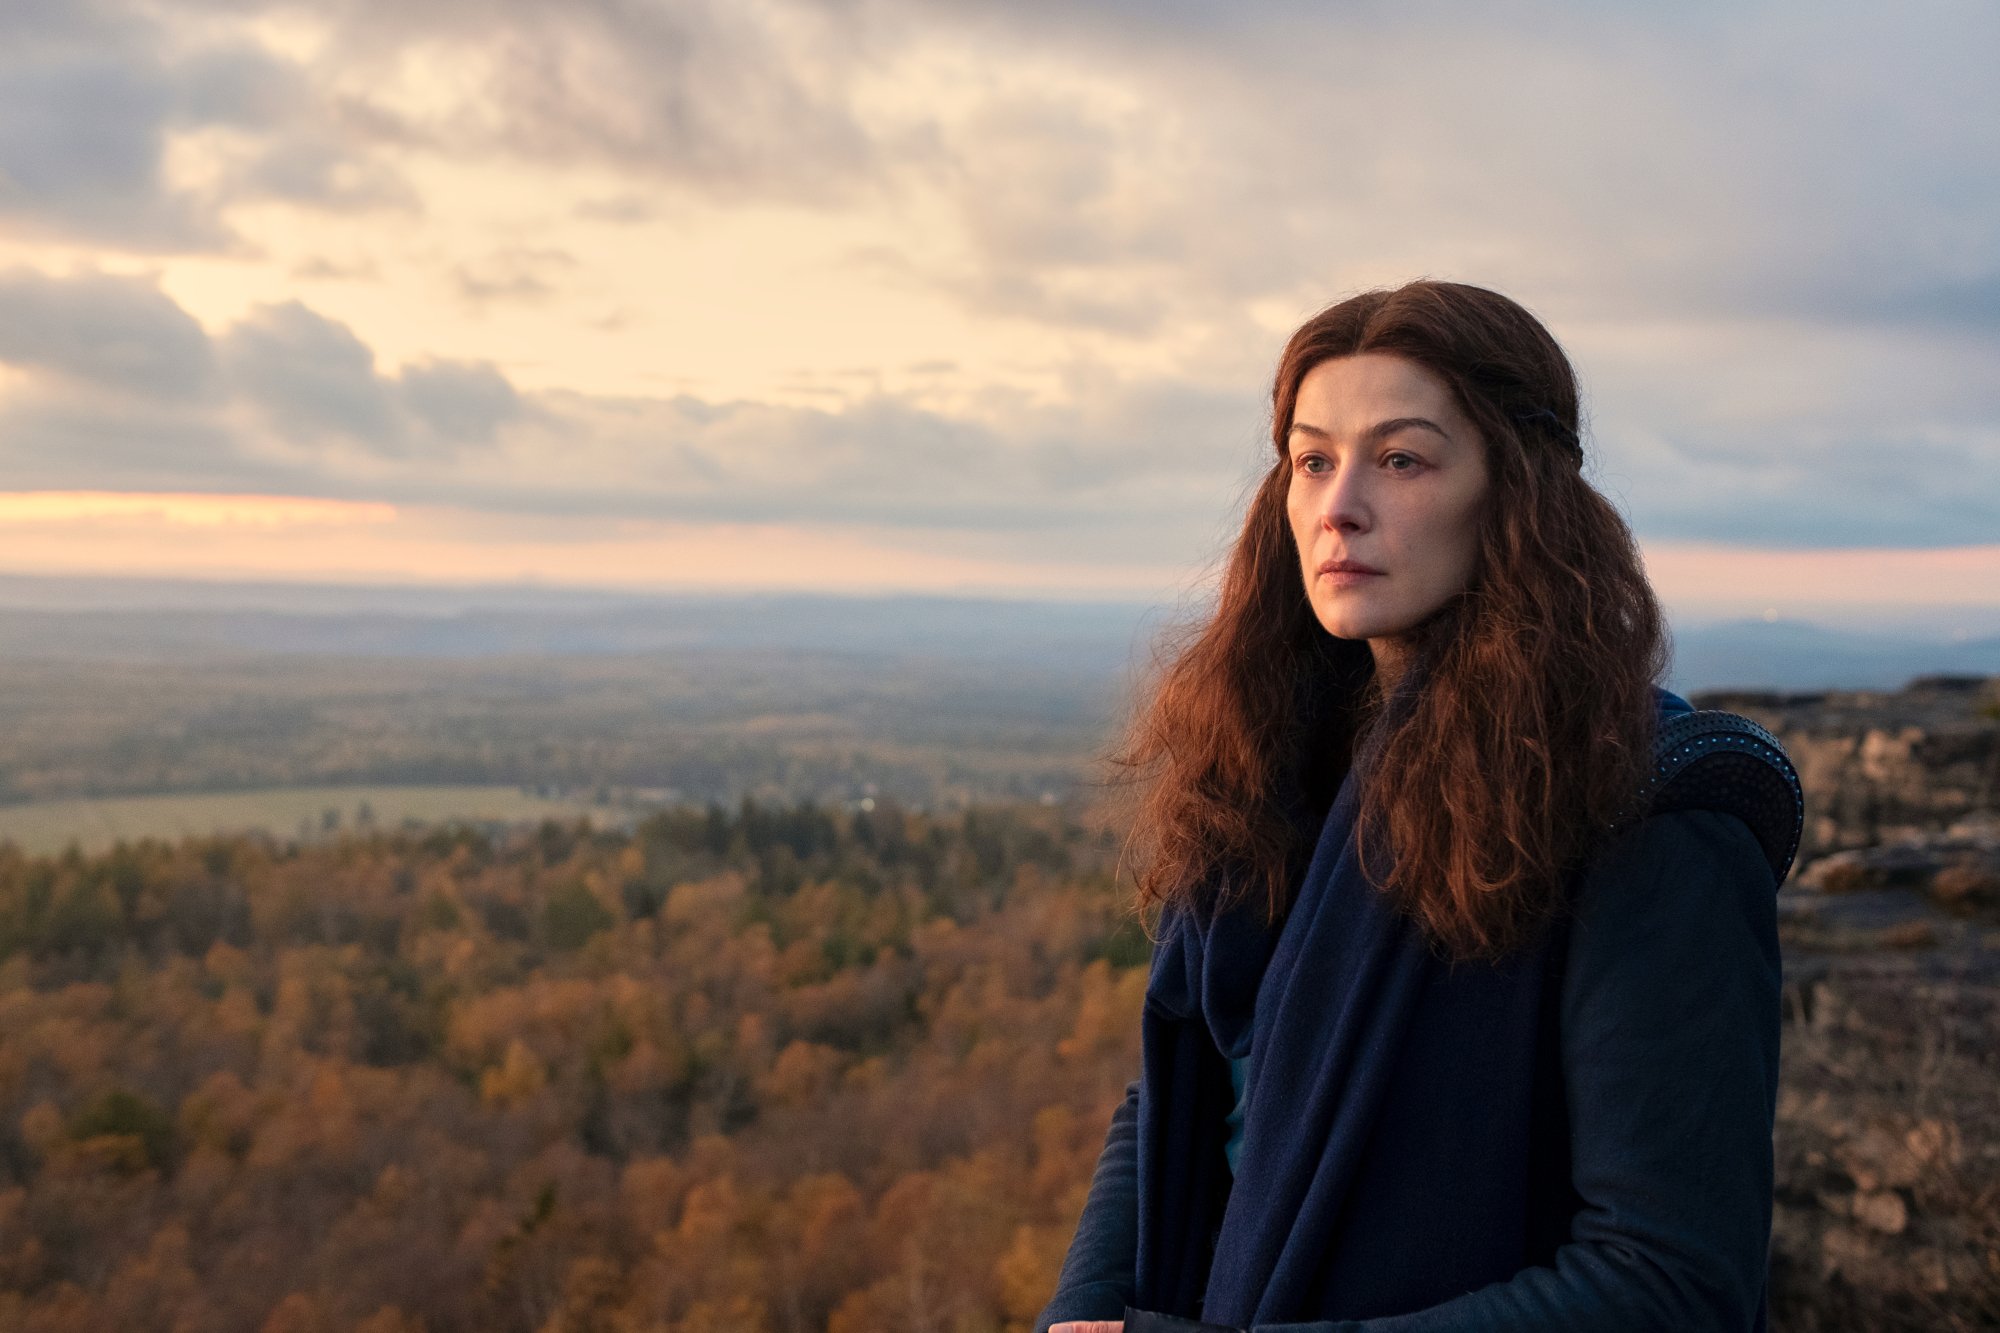 Rosamund Pike as Moiraine Damodred in Amazon Prime Video's 'The Wheel of Time' TV series. She's wearing a blue cloak and standing before a vast landscape.